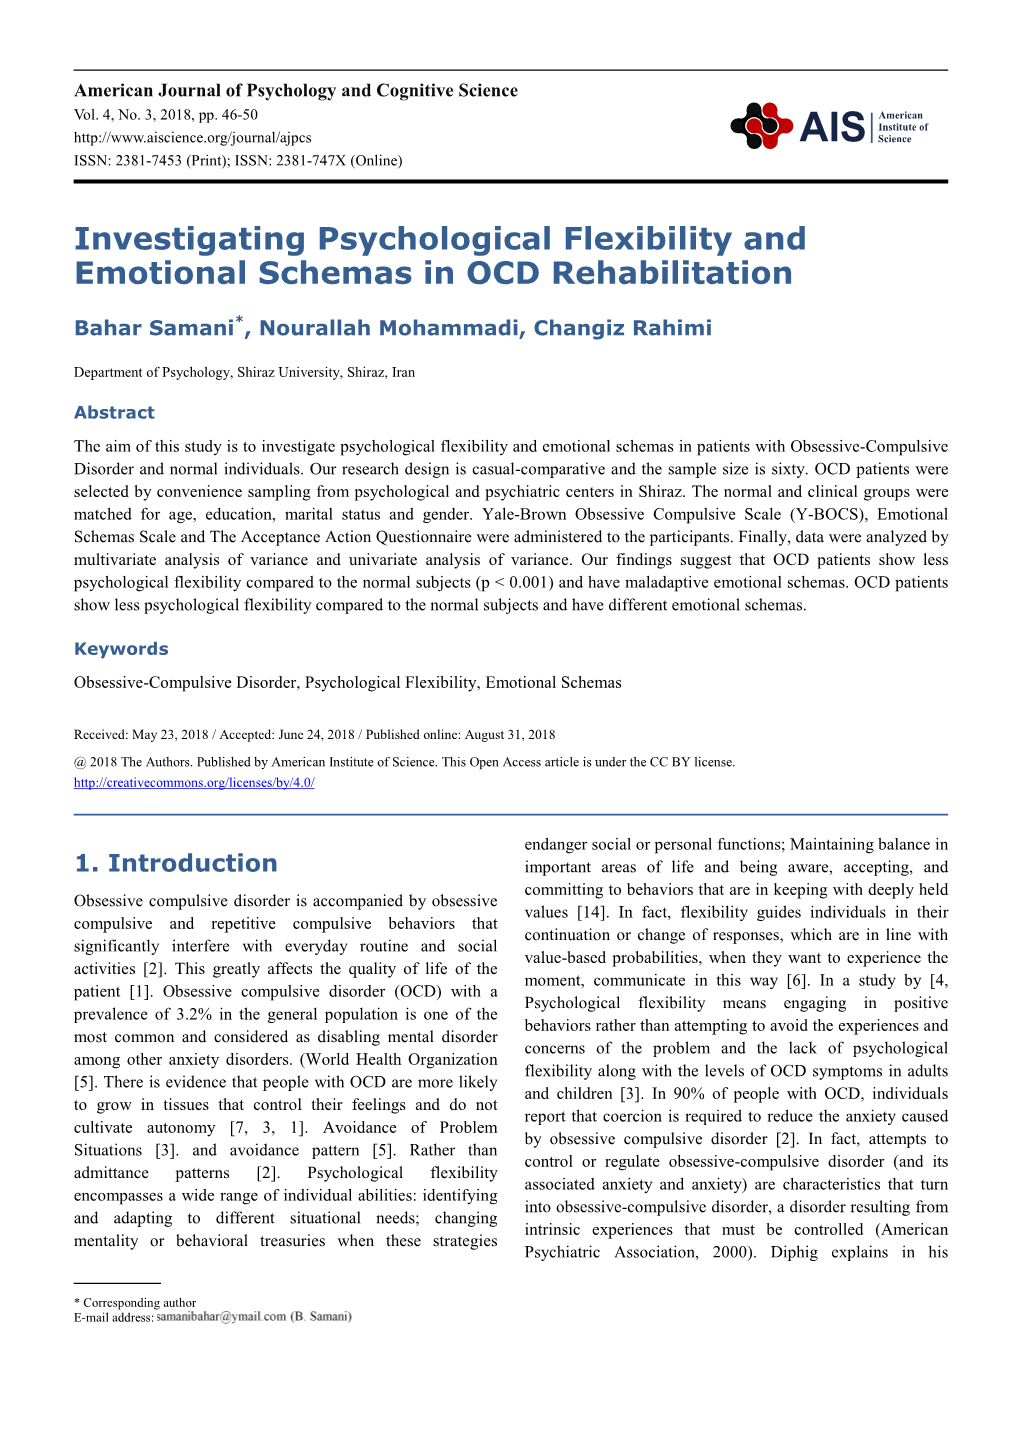 Investigating Psychological Flexibility and Emotional Schemas in OCD Rehabilitation